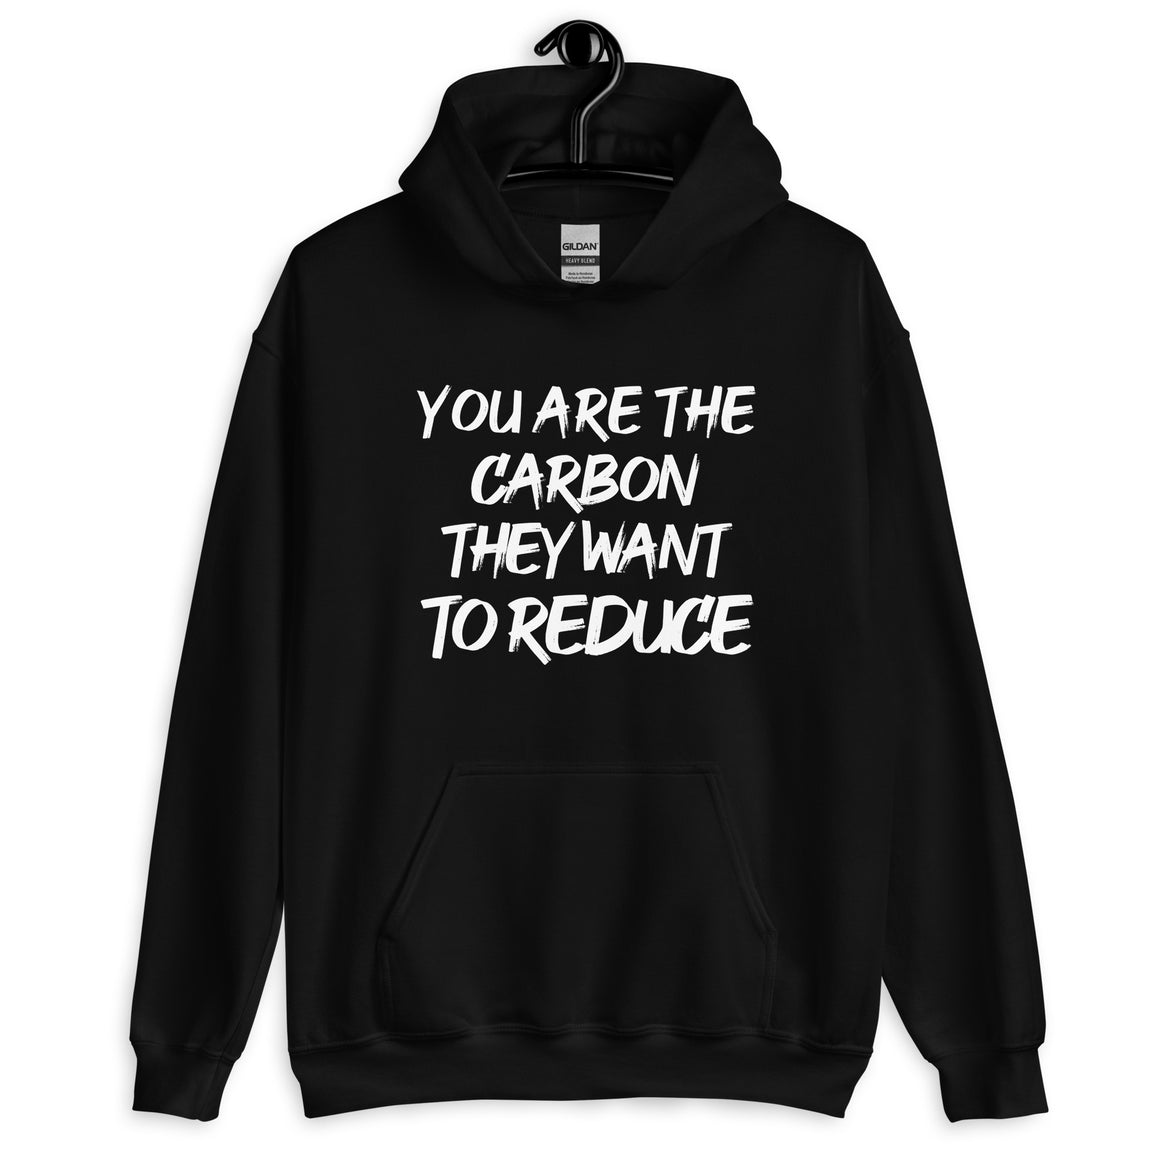 You Are The Carbon They Want To Reduce Hoodie by Libertarian Country